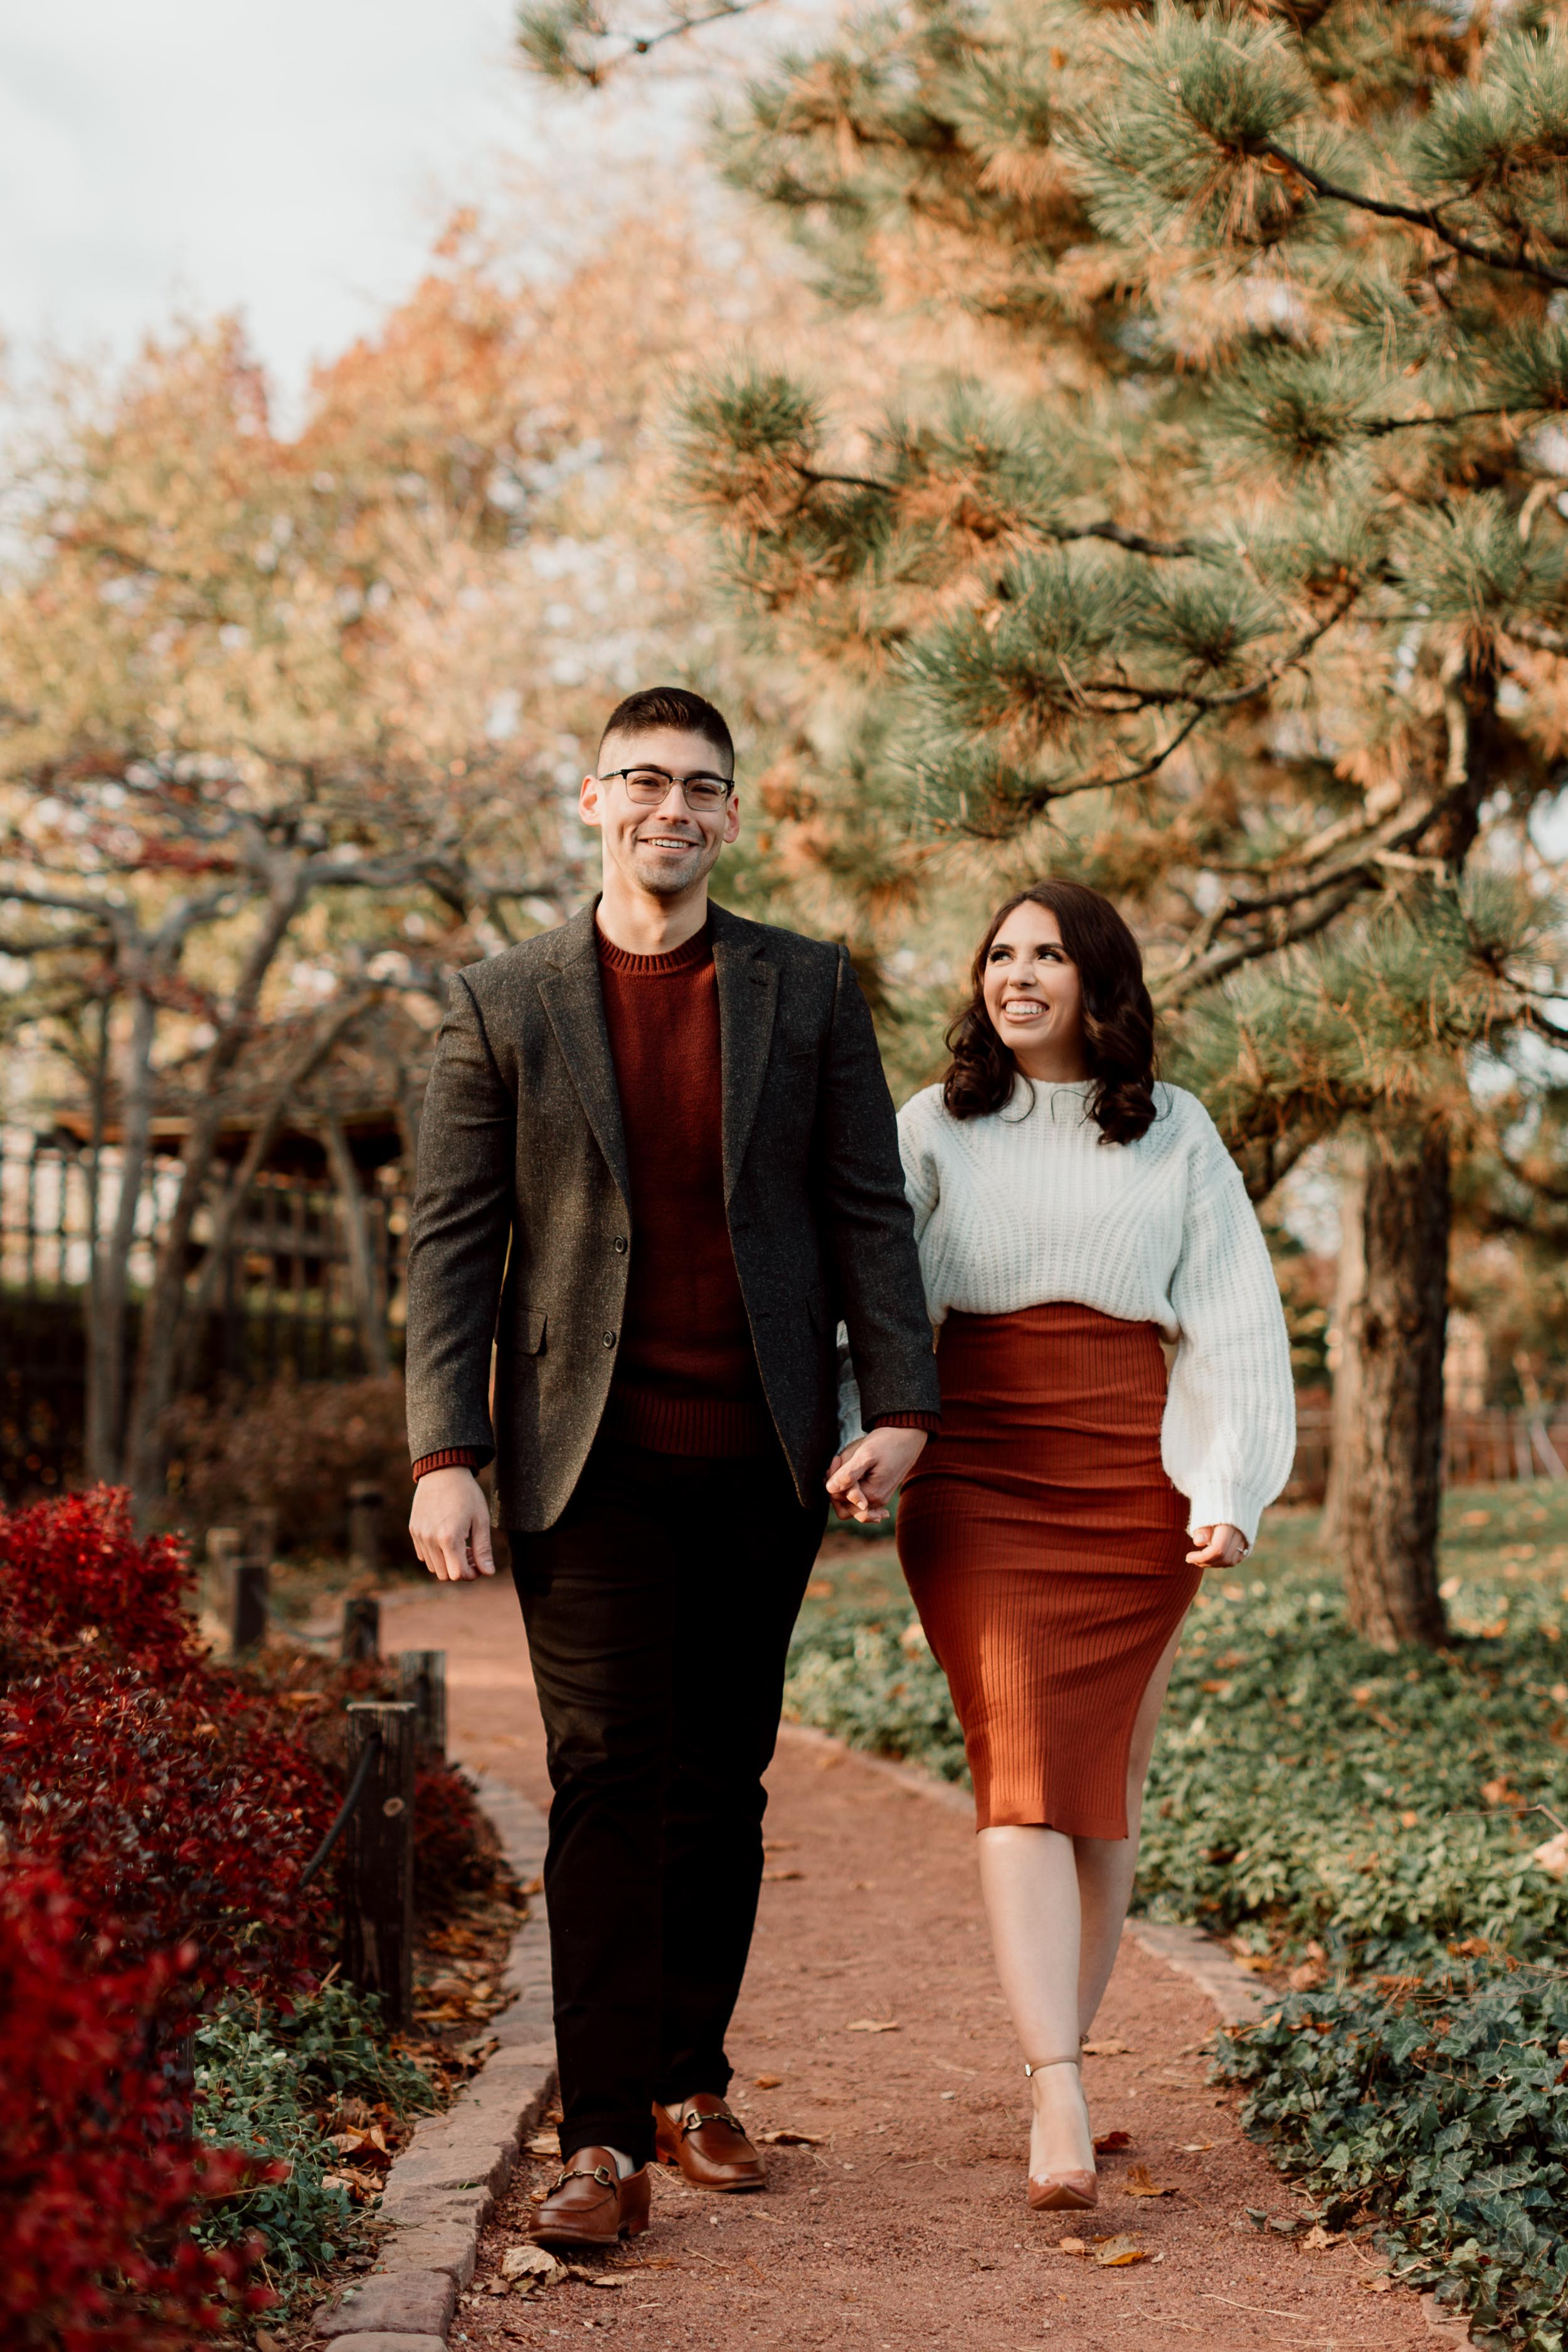 Stylish and chic outfits for fall engagement session
